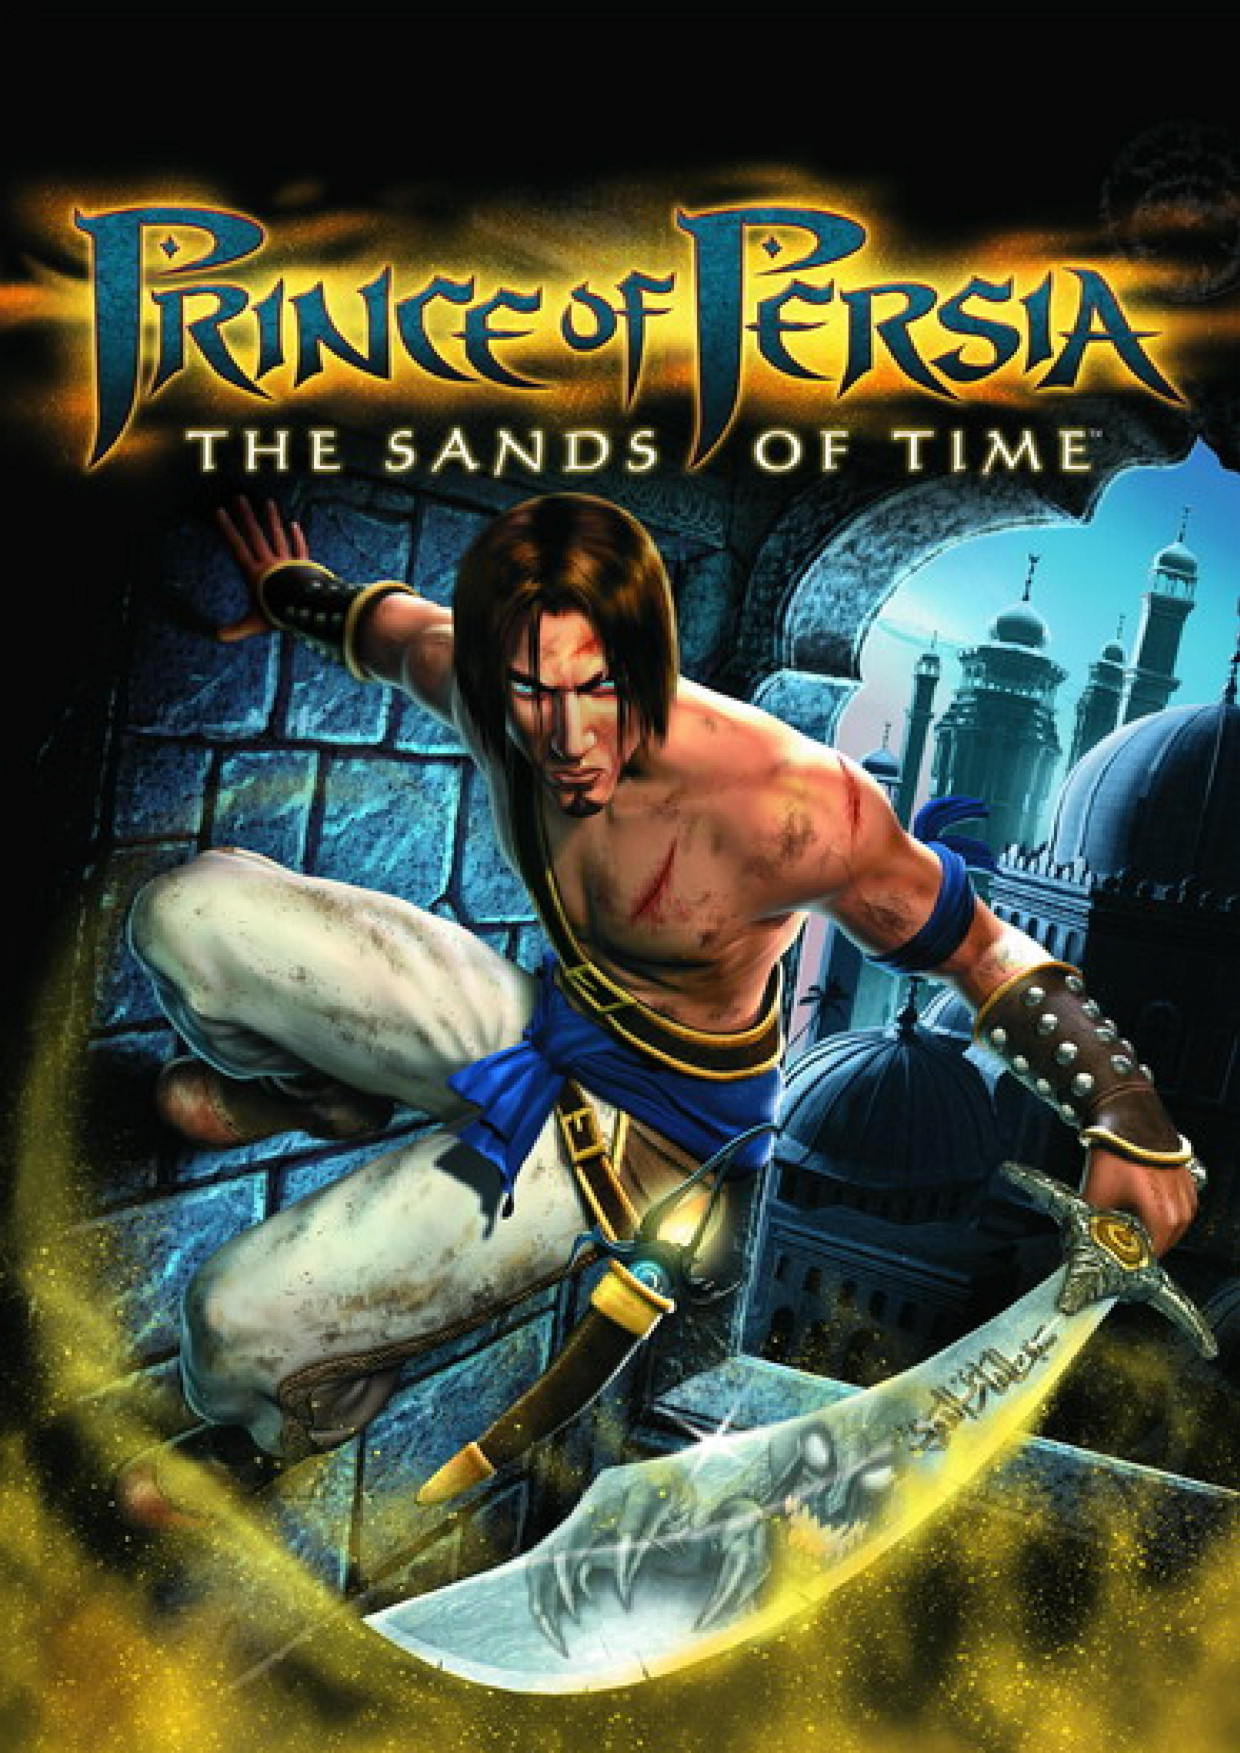 Prince of Persia: The Sands of Time Windows, XBOX, PS3 ... - 1240 x 1753 jpeg 548kB